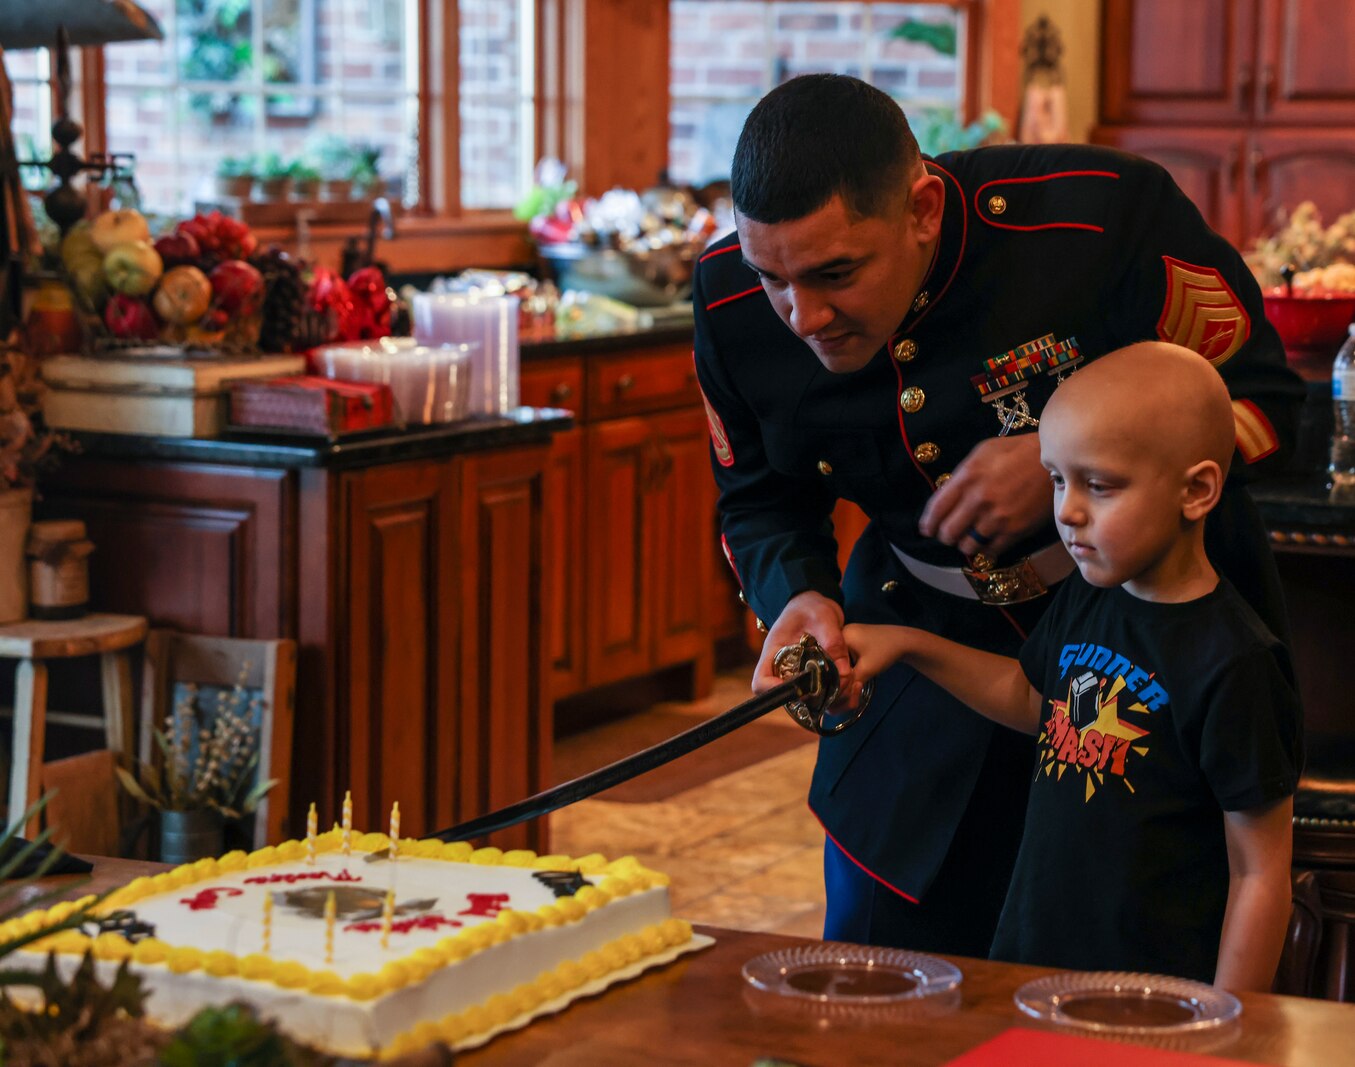 Gunner Sadler passes his piece of cake to his father Ryan Sadler in their home in Bloomington, Ill. on Dec. 18. The Marine Corps coordinated with the Saddler family to conduct the ceremony in honor of Gunners strength and tenacity as he faces the road forward, guided by the Make-A-Wish foundation. Ryan is a Marine Corps veteran who wanted to share a Marine Corps tradition with his son.  (U.S. Marine Corps photo by Lance Cpl. Tyler M. Solak)